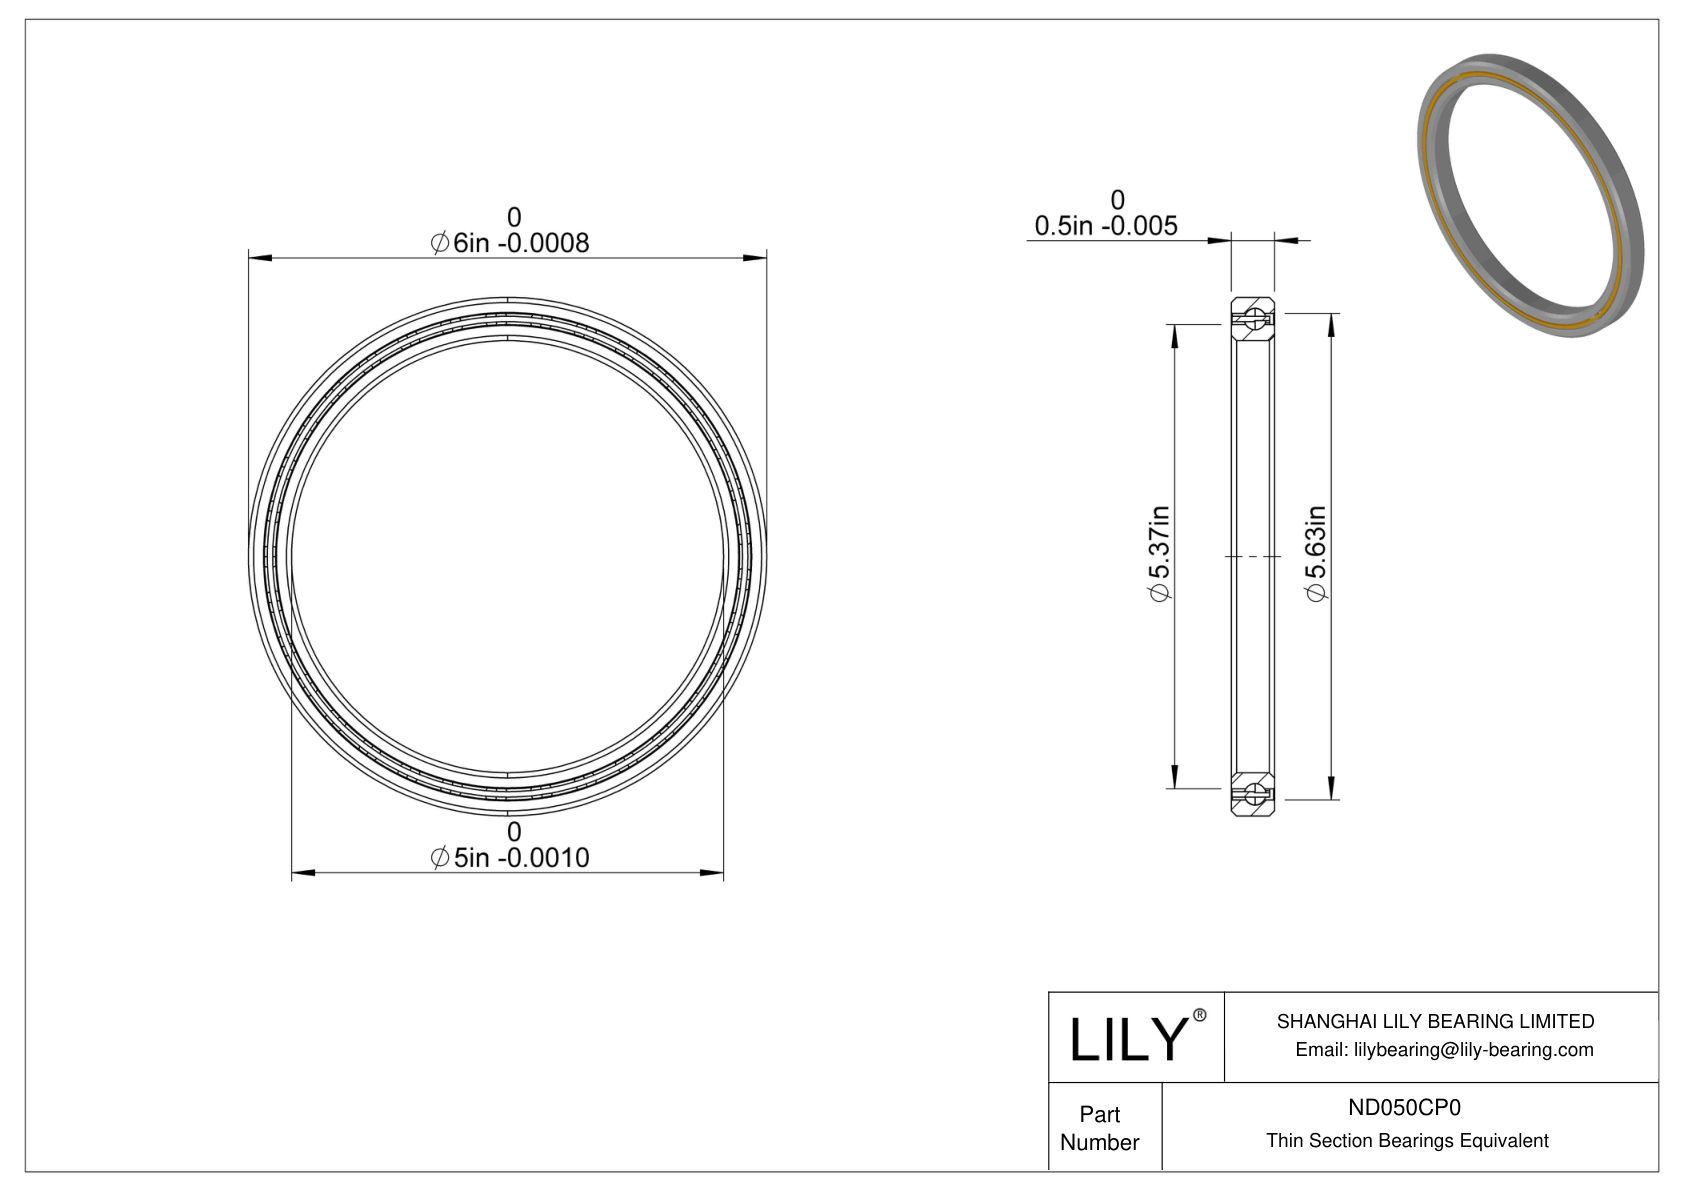 ND050CP0 Constant Section (CS) Bearings cad drawing